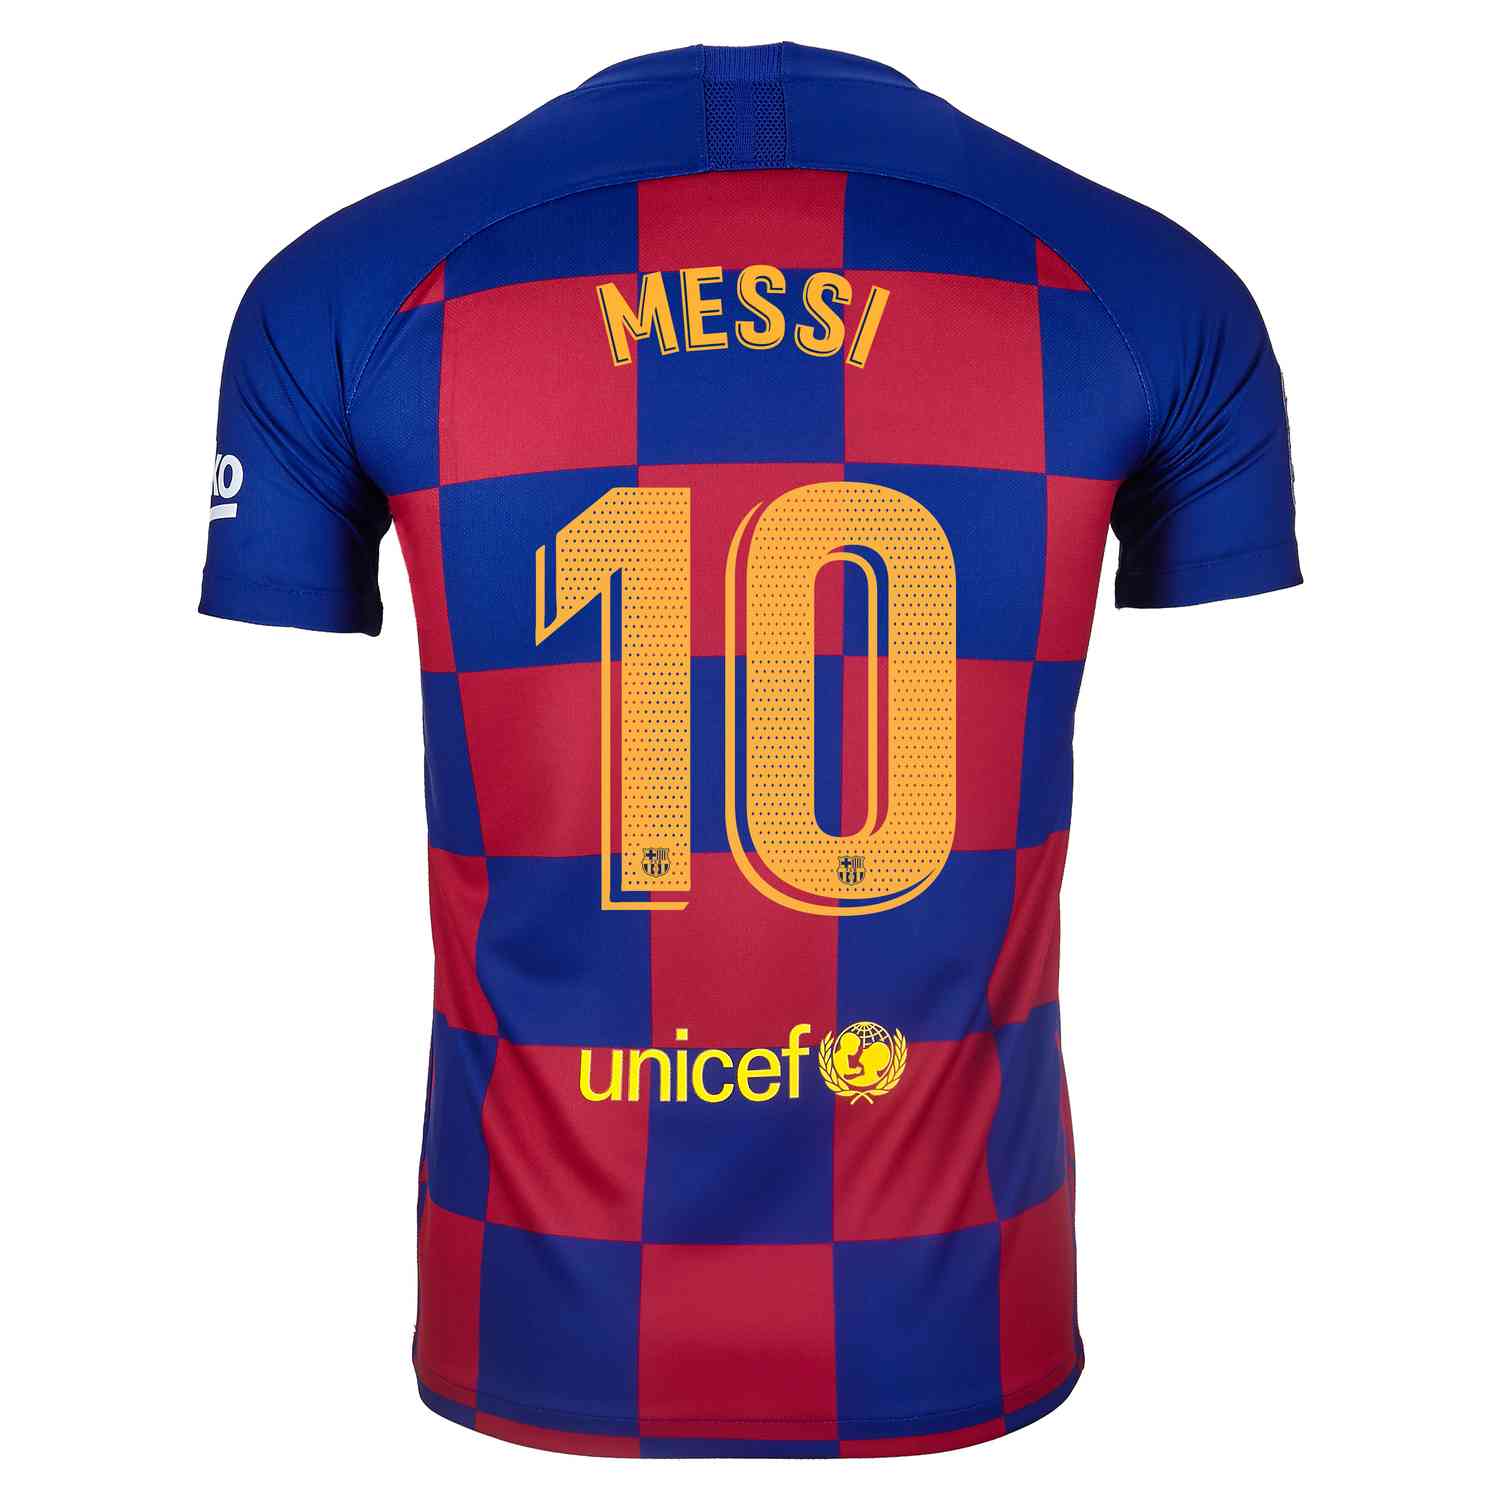 messi jersey youth 2019